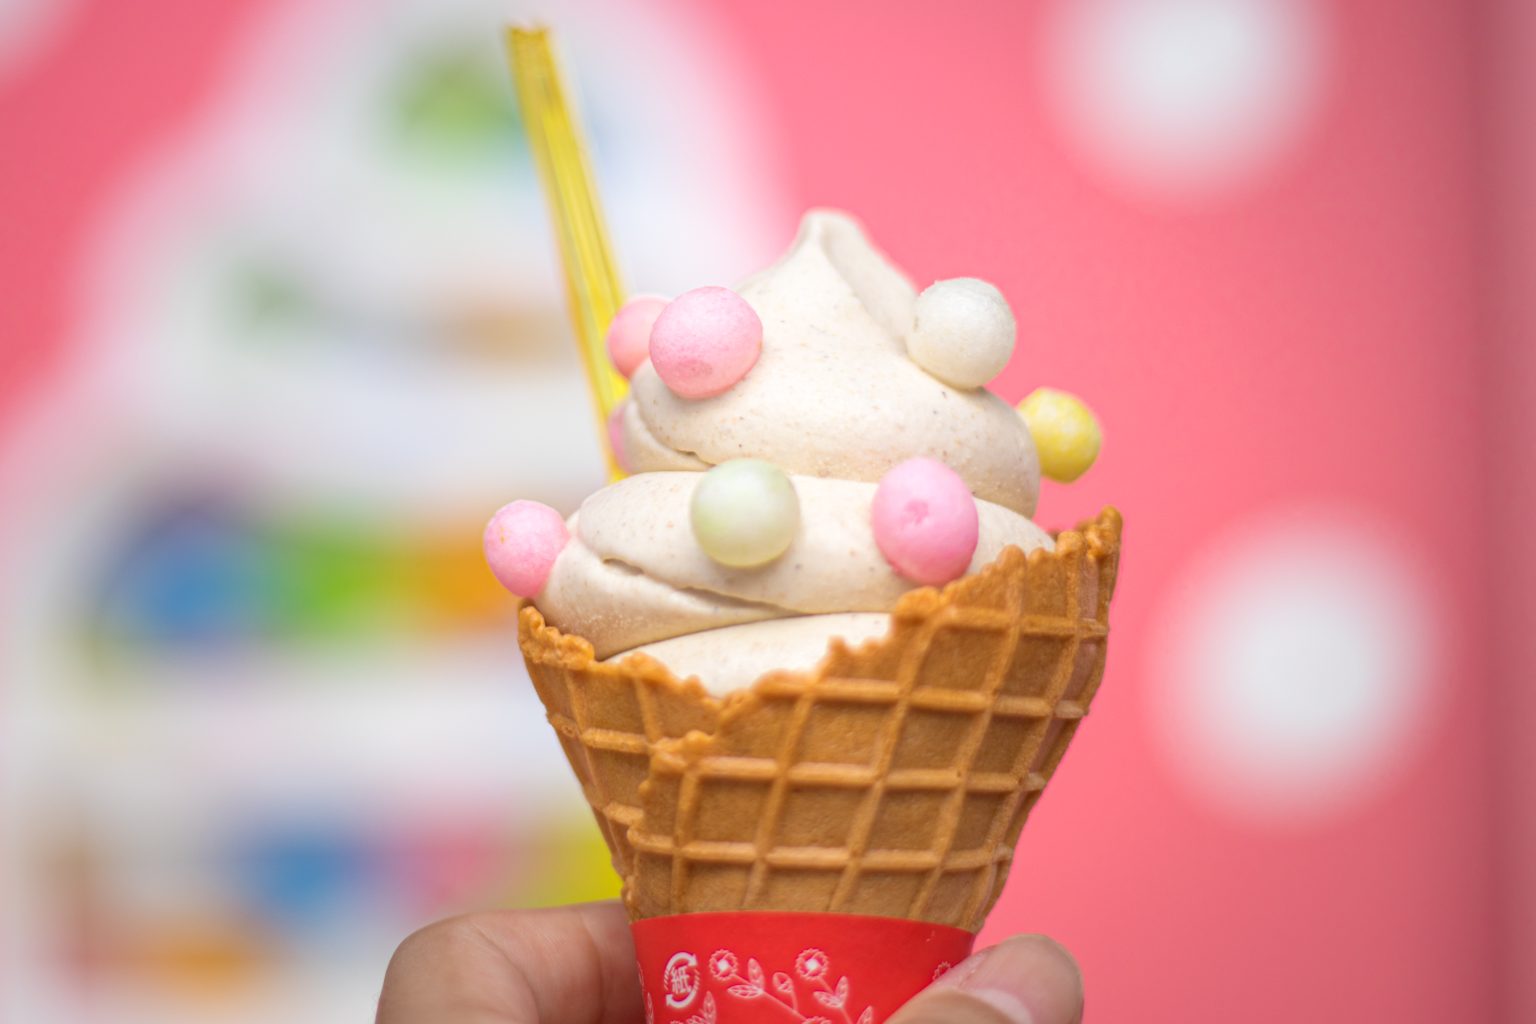 Hand with ice cream cone on a colorful blurred background. The photo is taken at Harajuku Takeshita Street, Japan, by Sysbird.